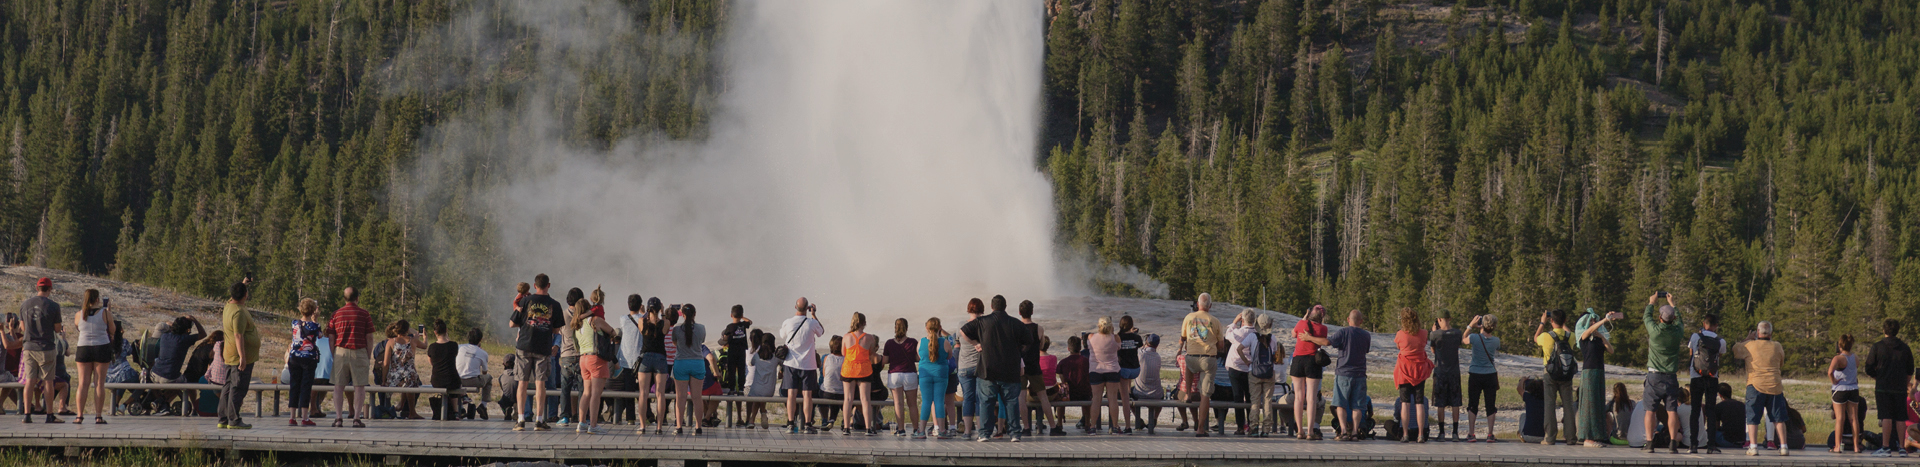 Crowds in front of old faithful in Yellowstone National Park. 